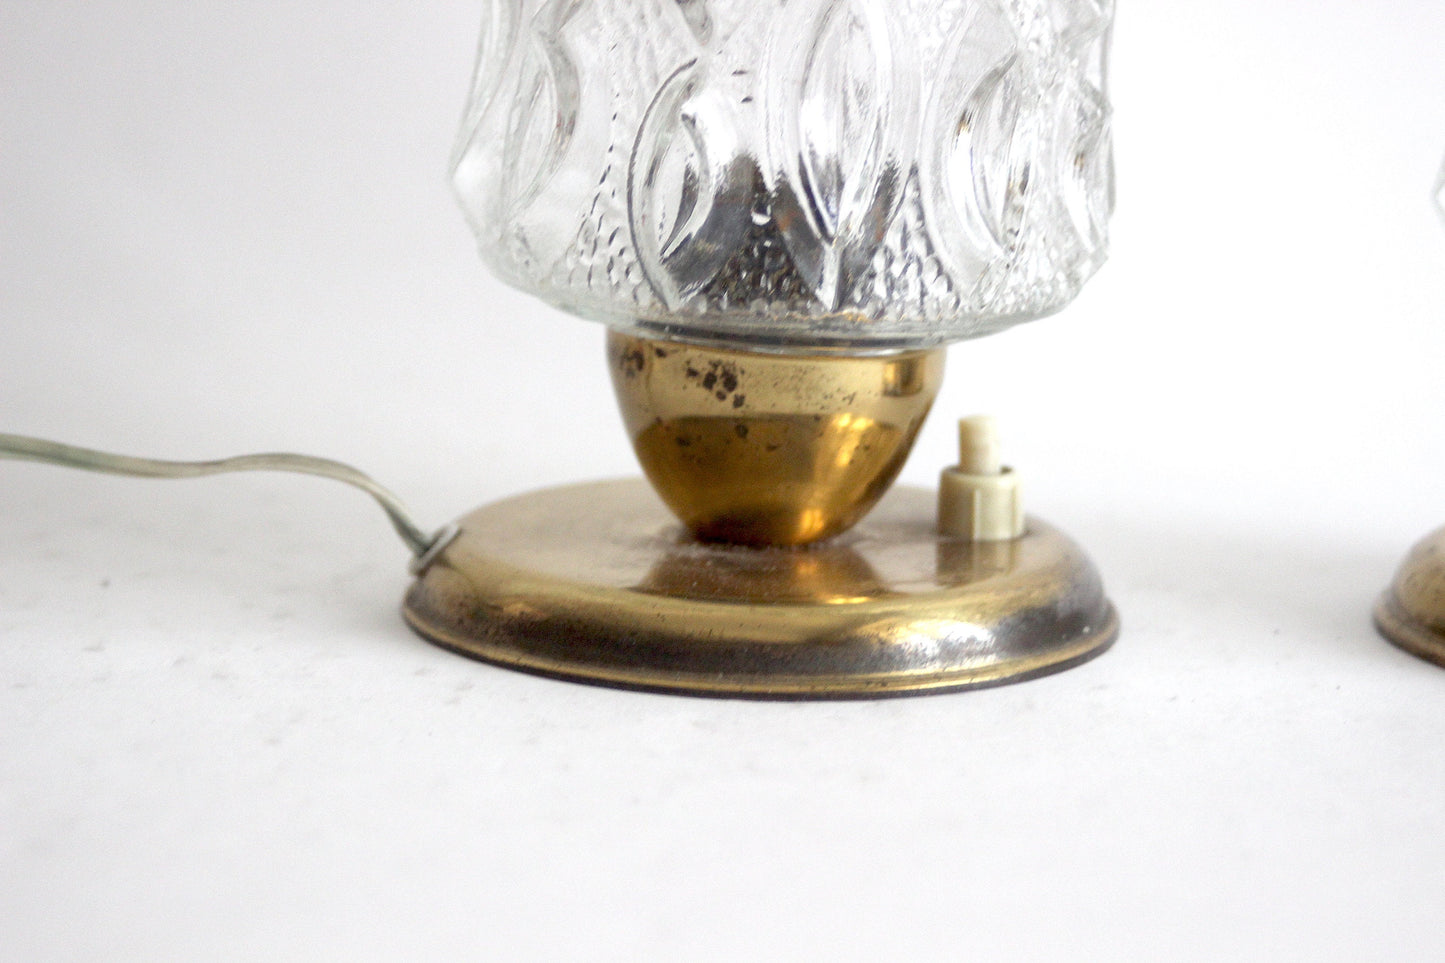 German brass and glass bedside lamp 1950s. Mid-century style.